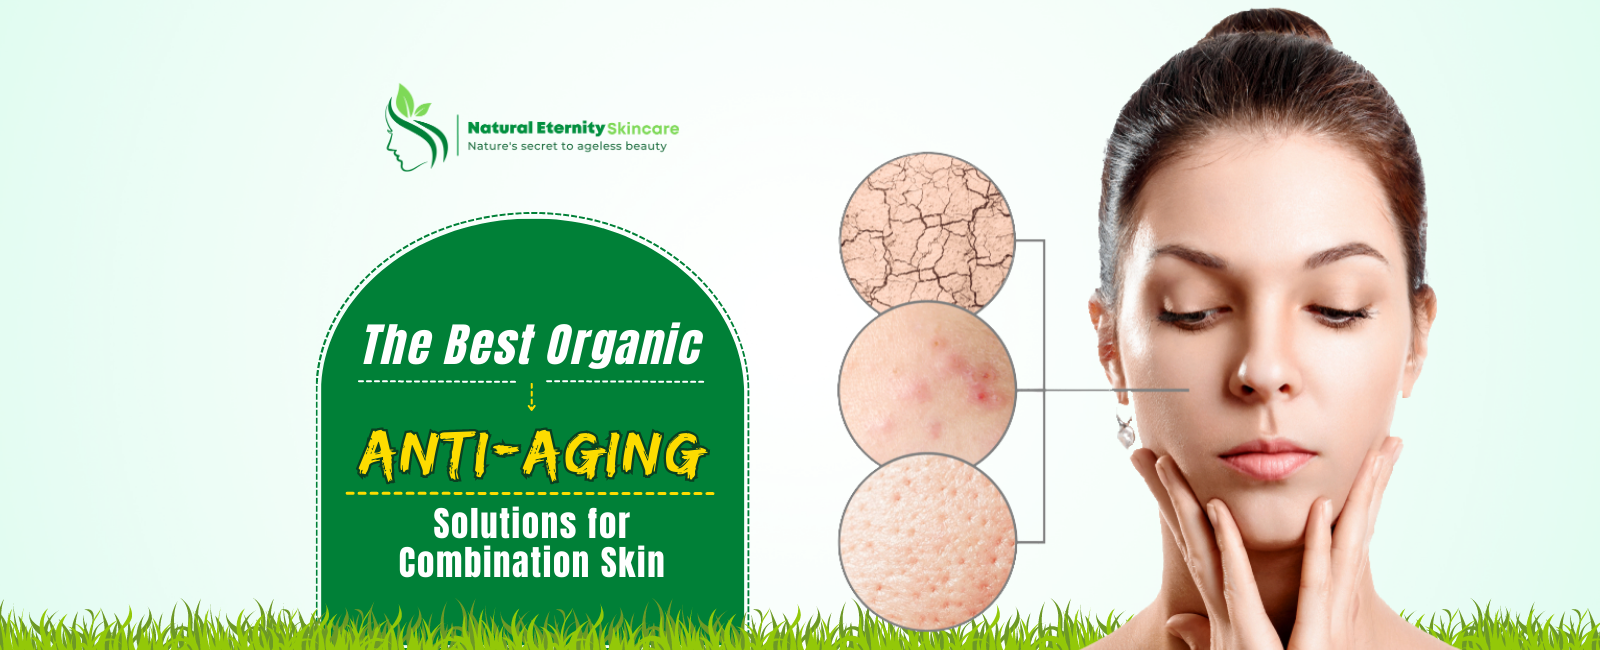 Organic Anti-Aging Solutions for Combination Skin